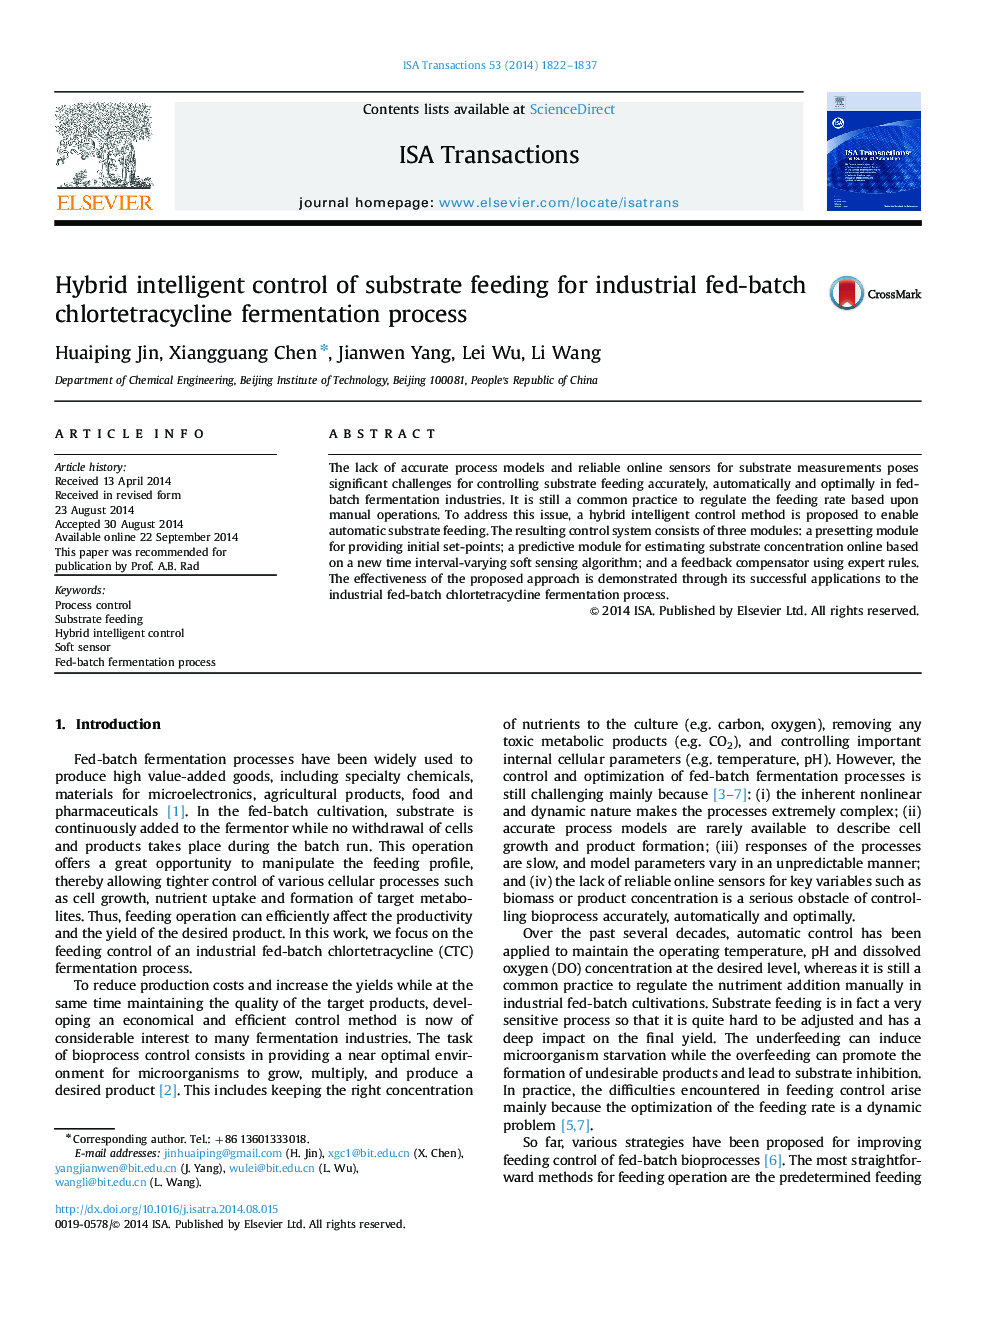 Practice ArticleHybrid intelligent control of substrate feeding for industrial fed-batch chlortetracycline fermentation process